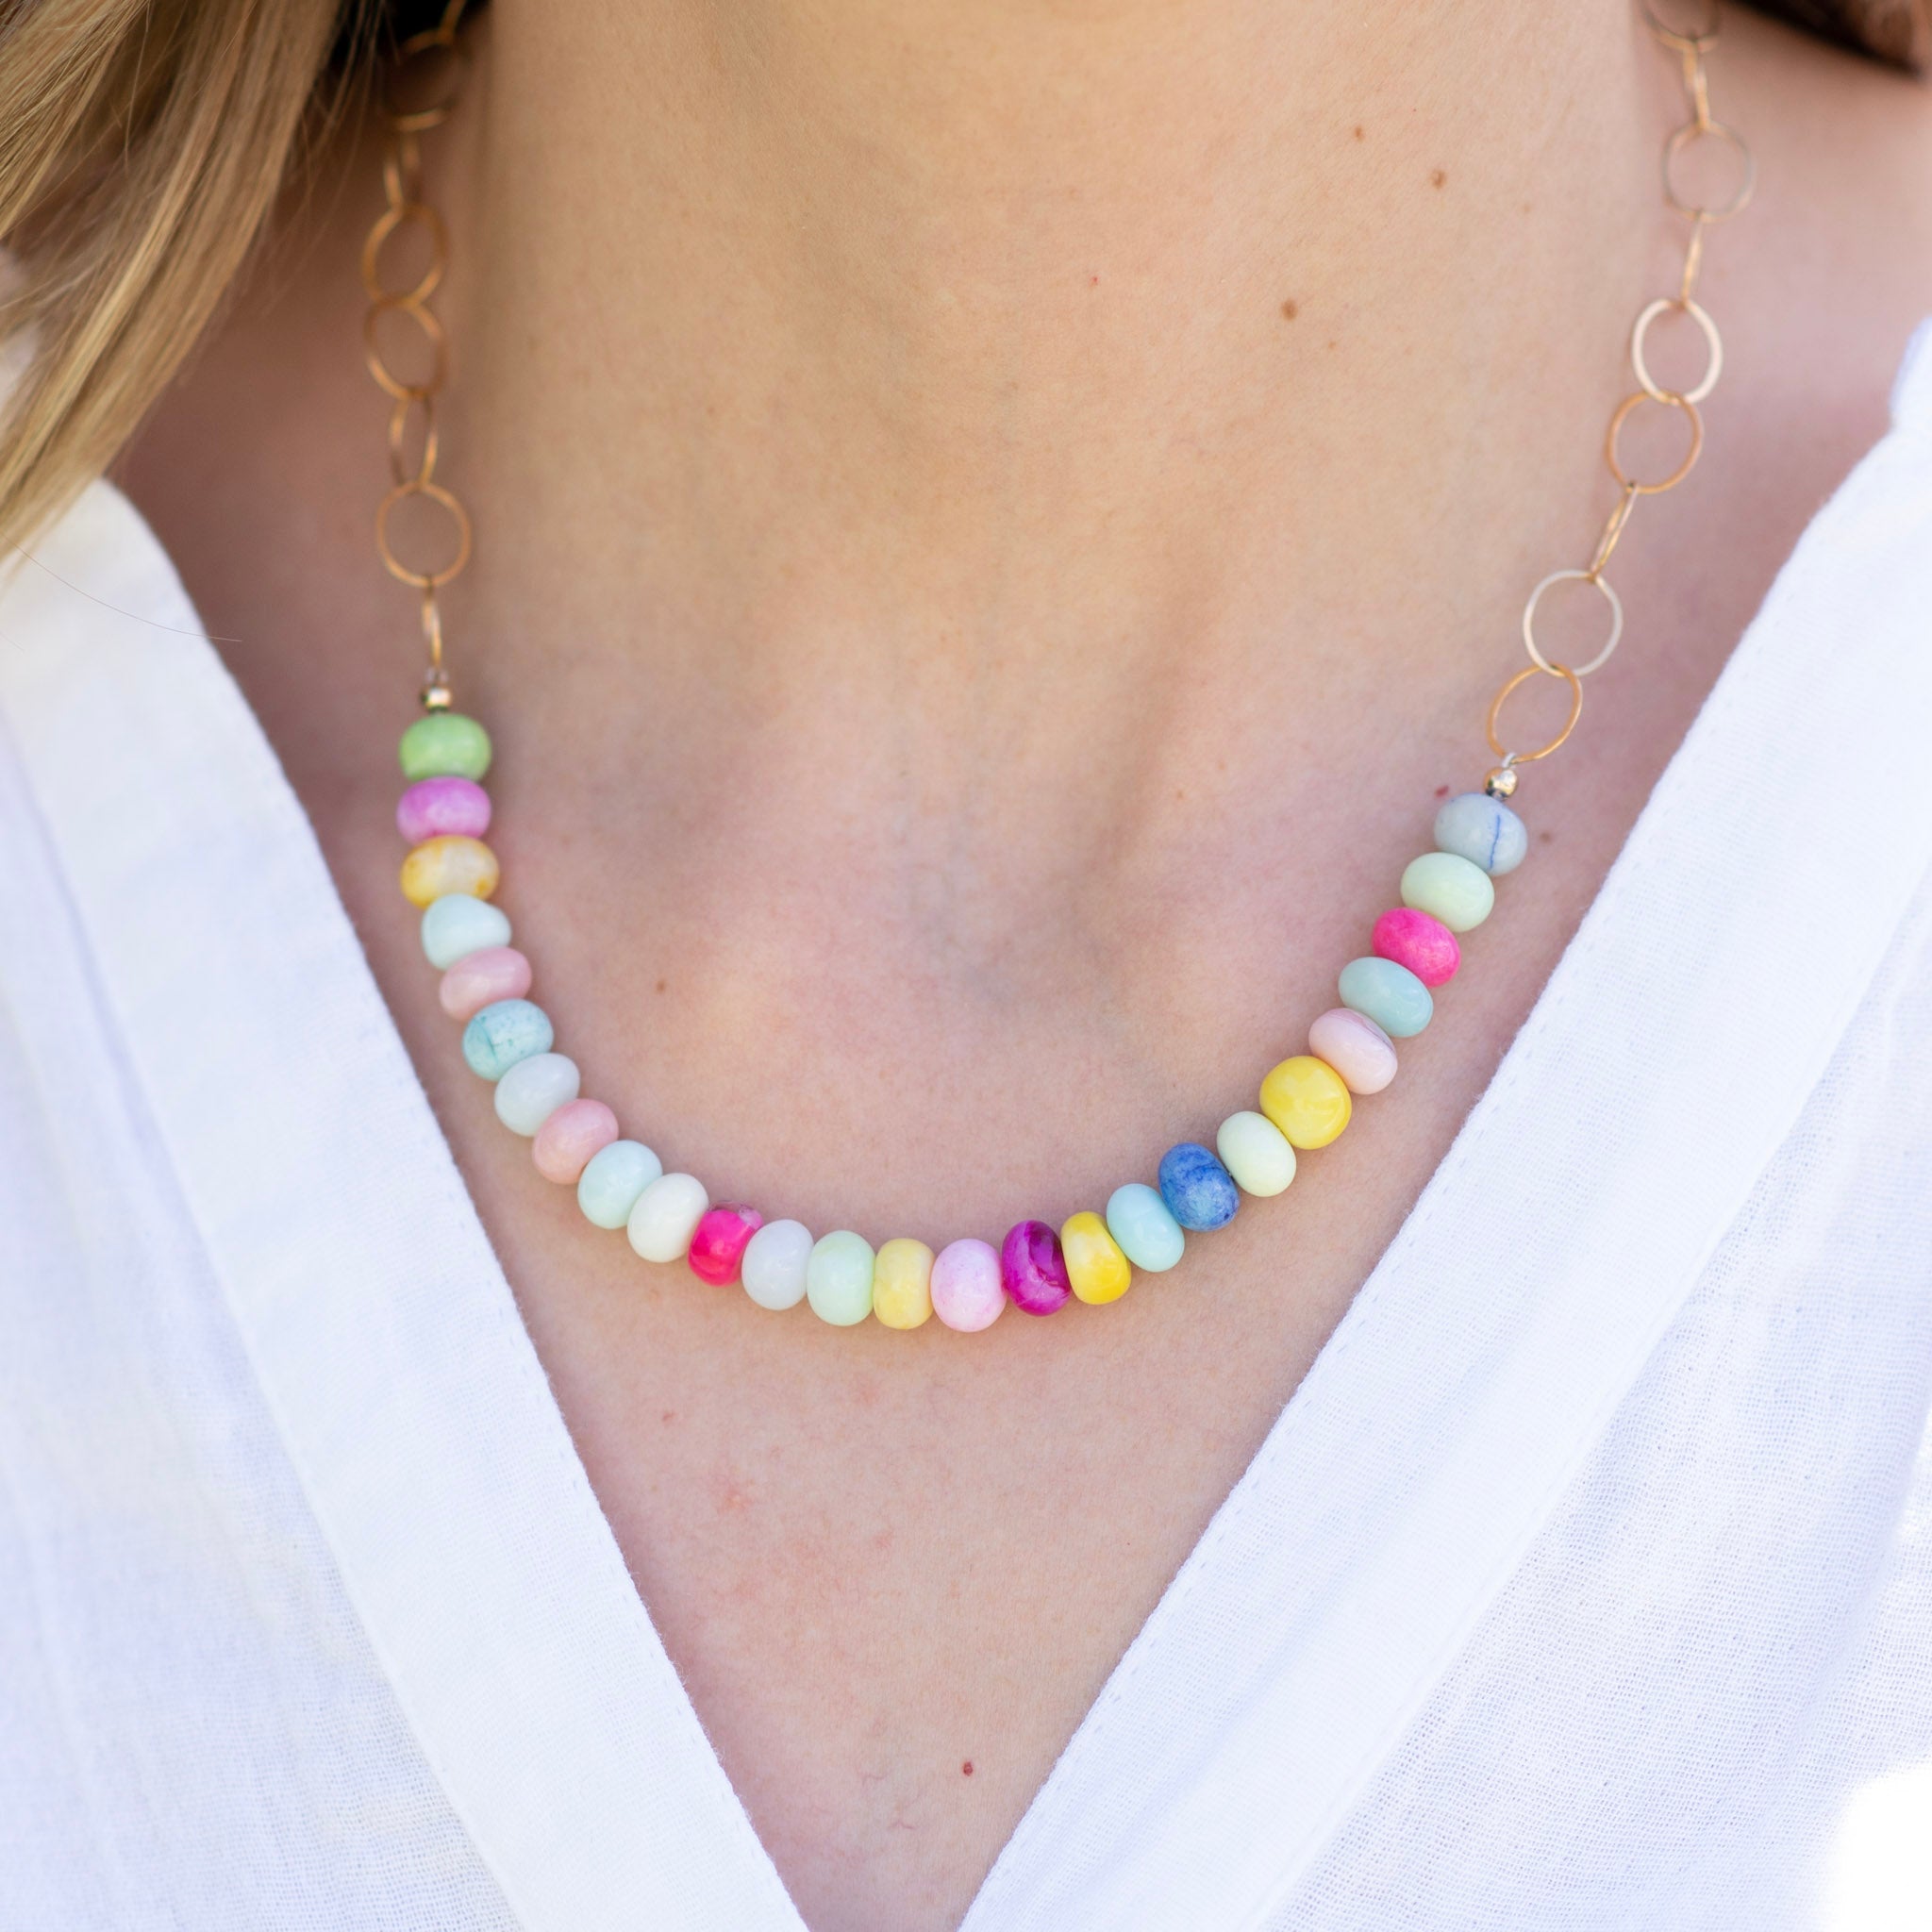 14k Gold Filled Chain + Peruvian Opal Necklace